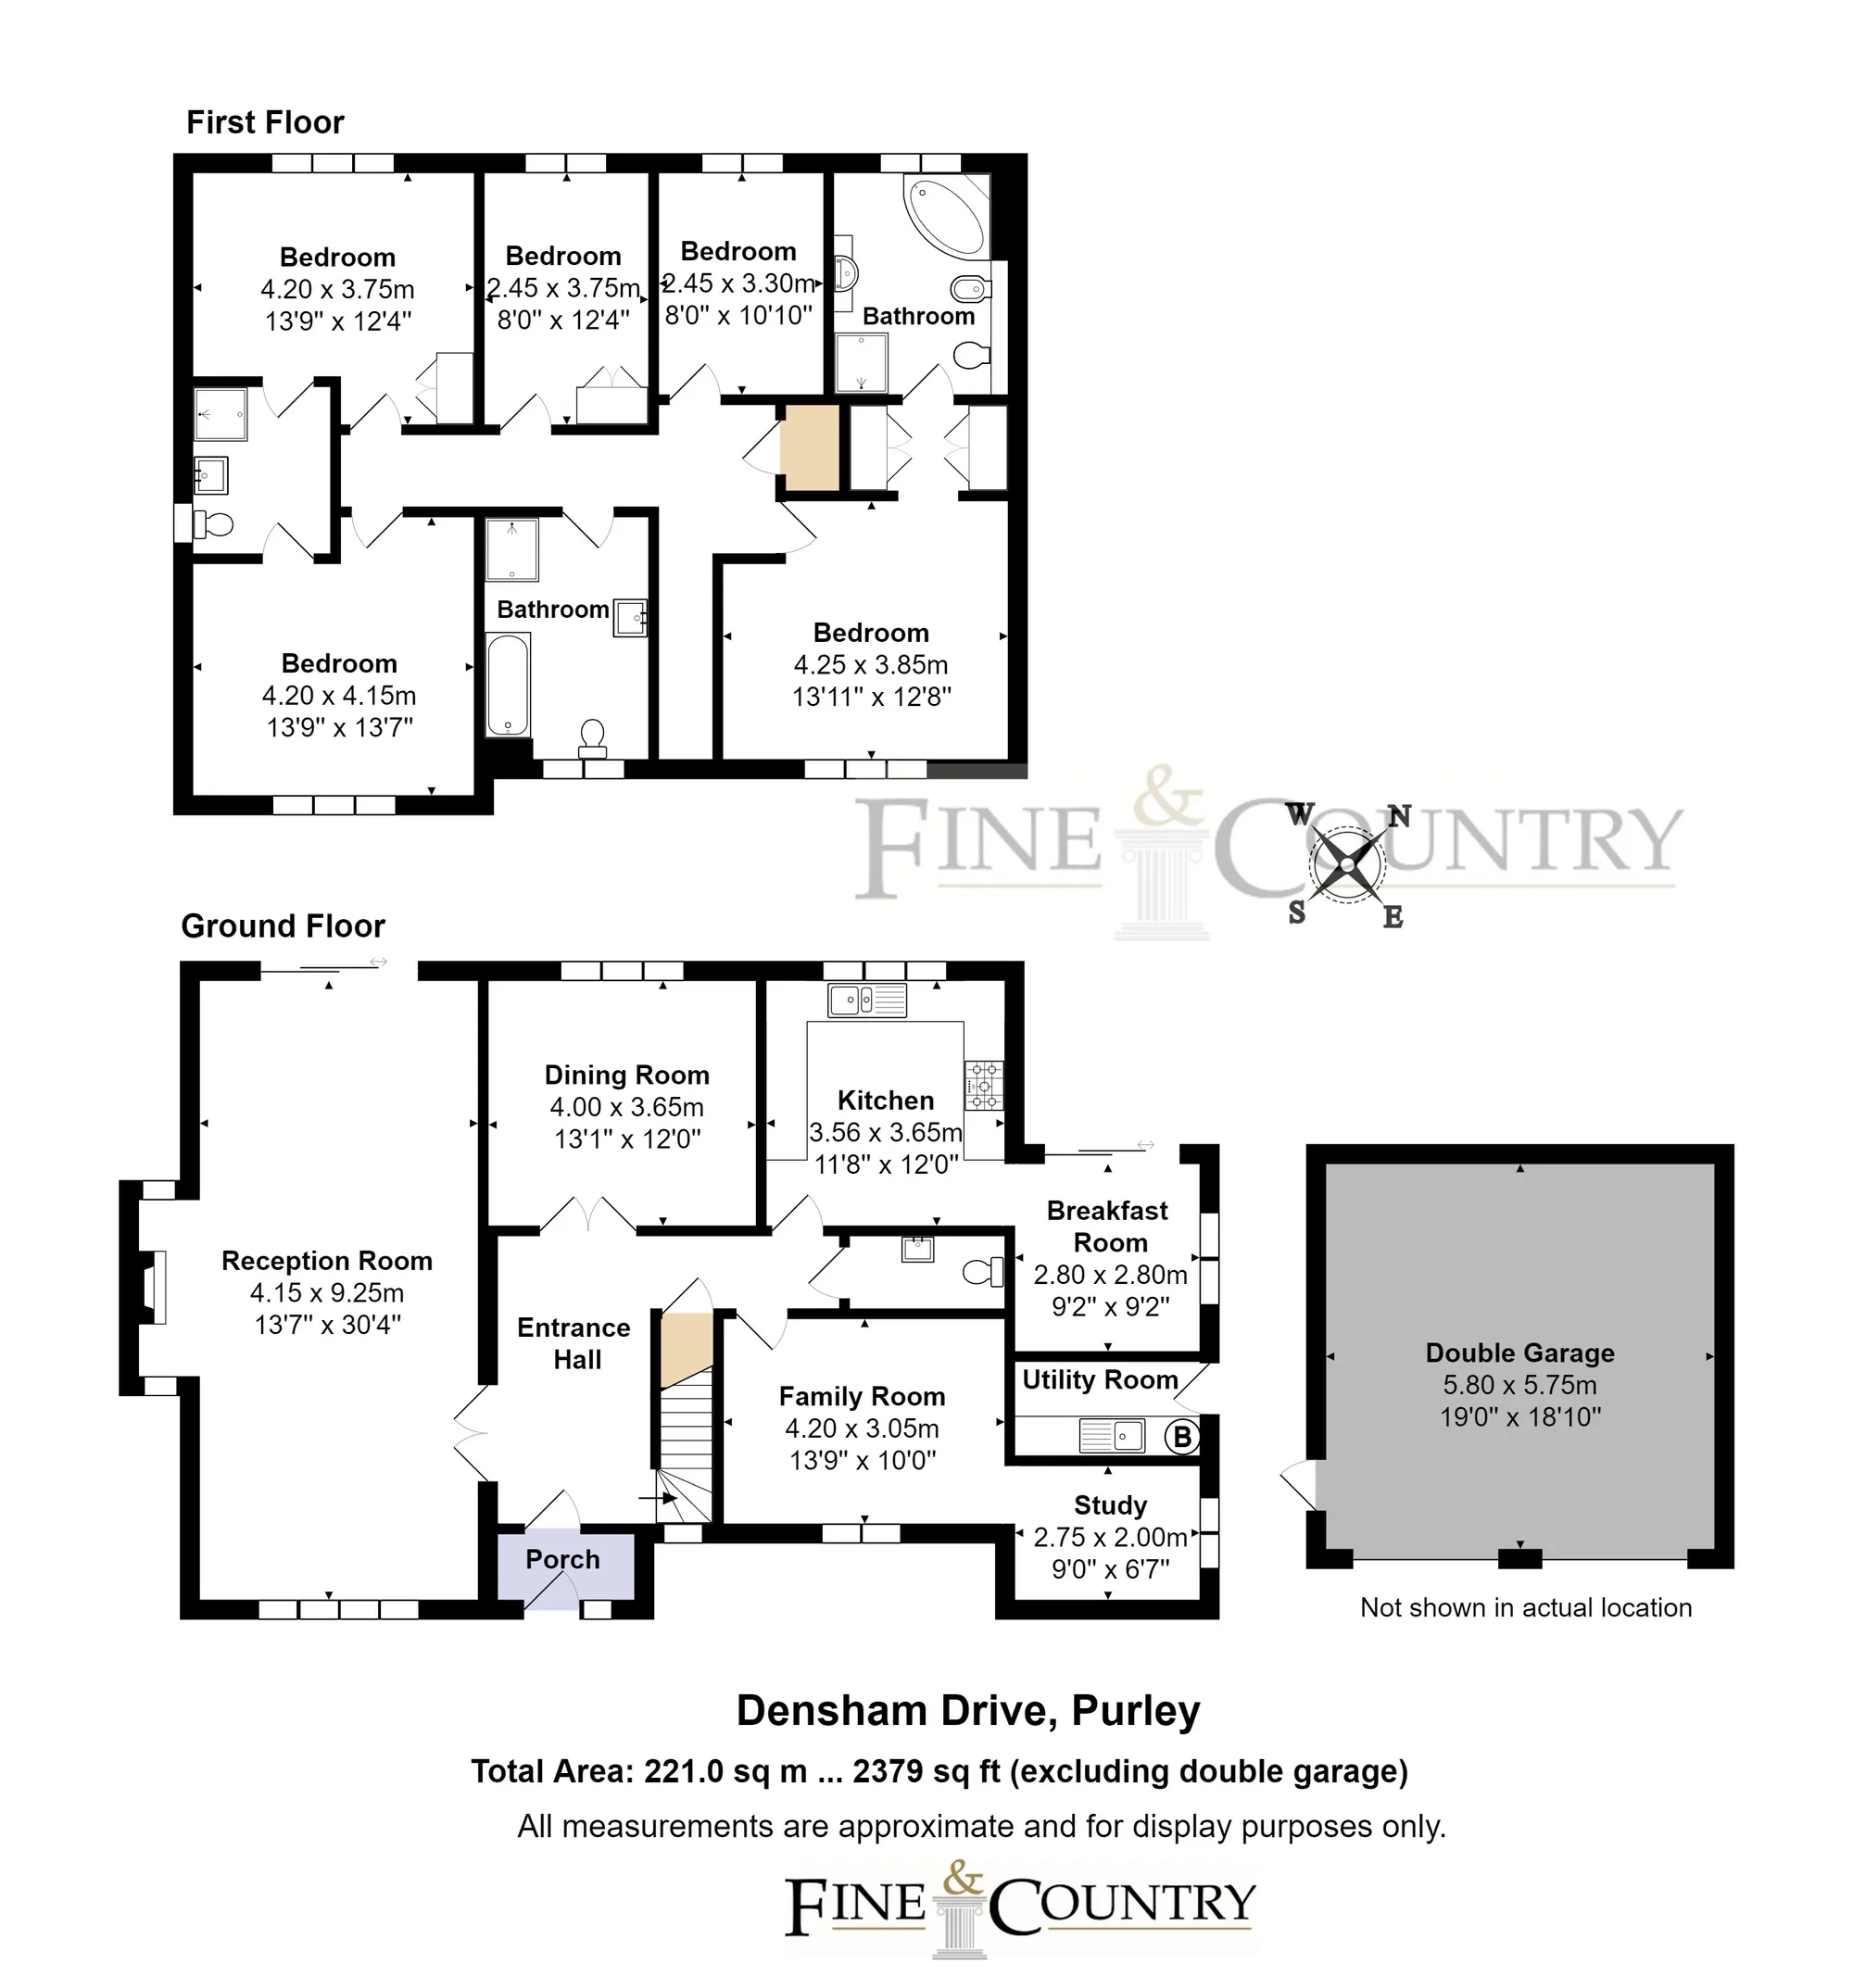 5 bed detached house for sale in Densham Drive, Purley - Property floorplan